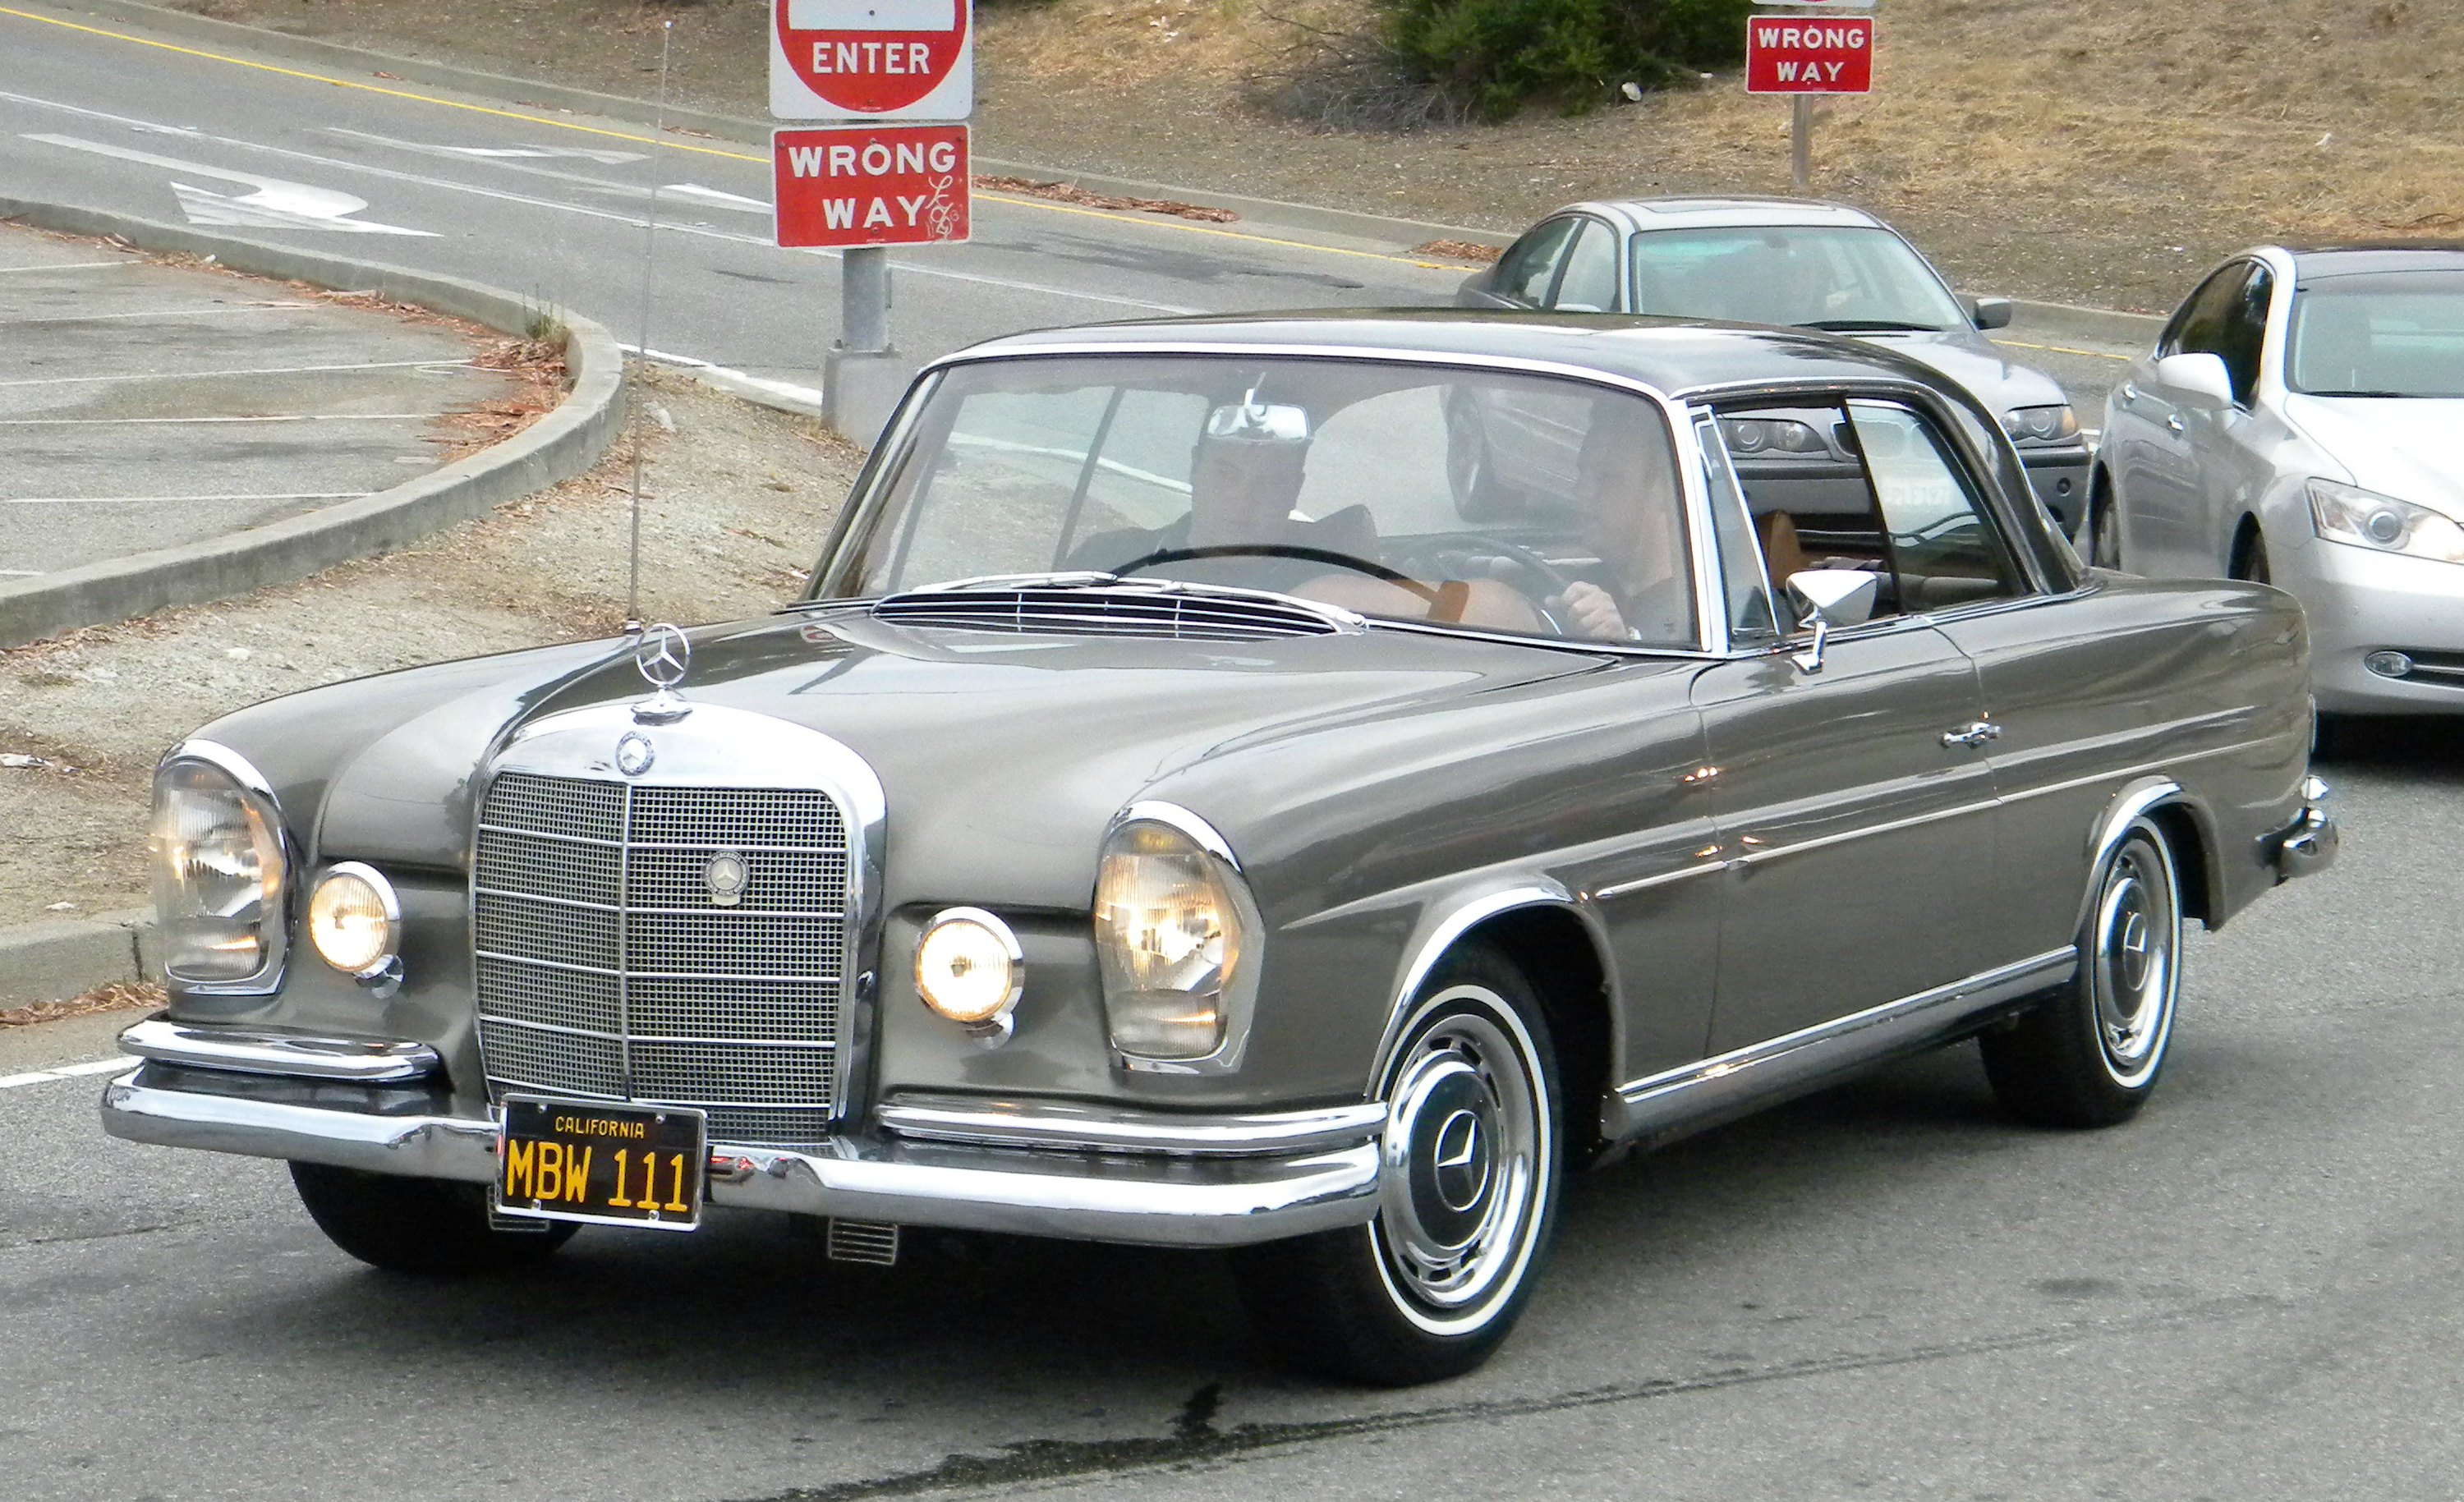 1968 Mercedes-Benz 280 SE Coupe 'MBW 111' 1 | Flickr - Photo Sharing!